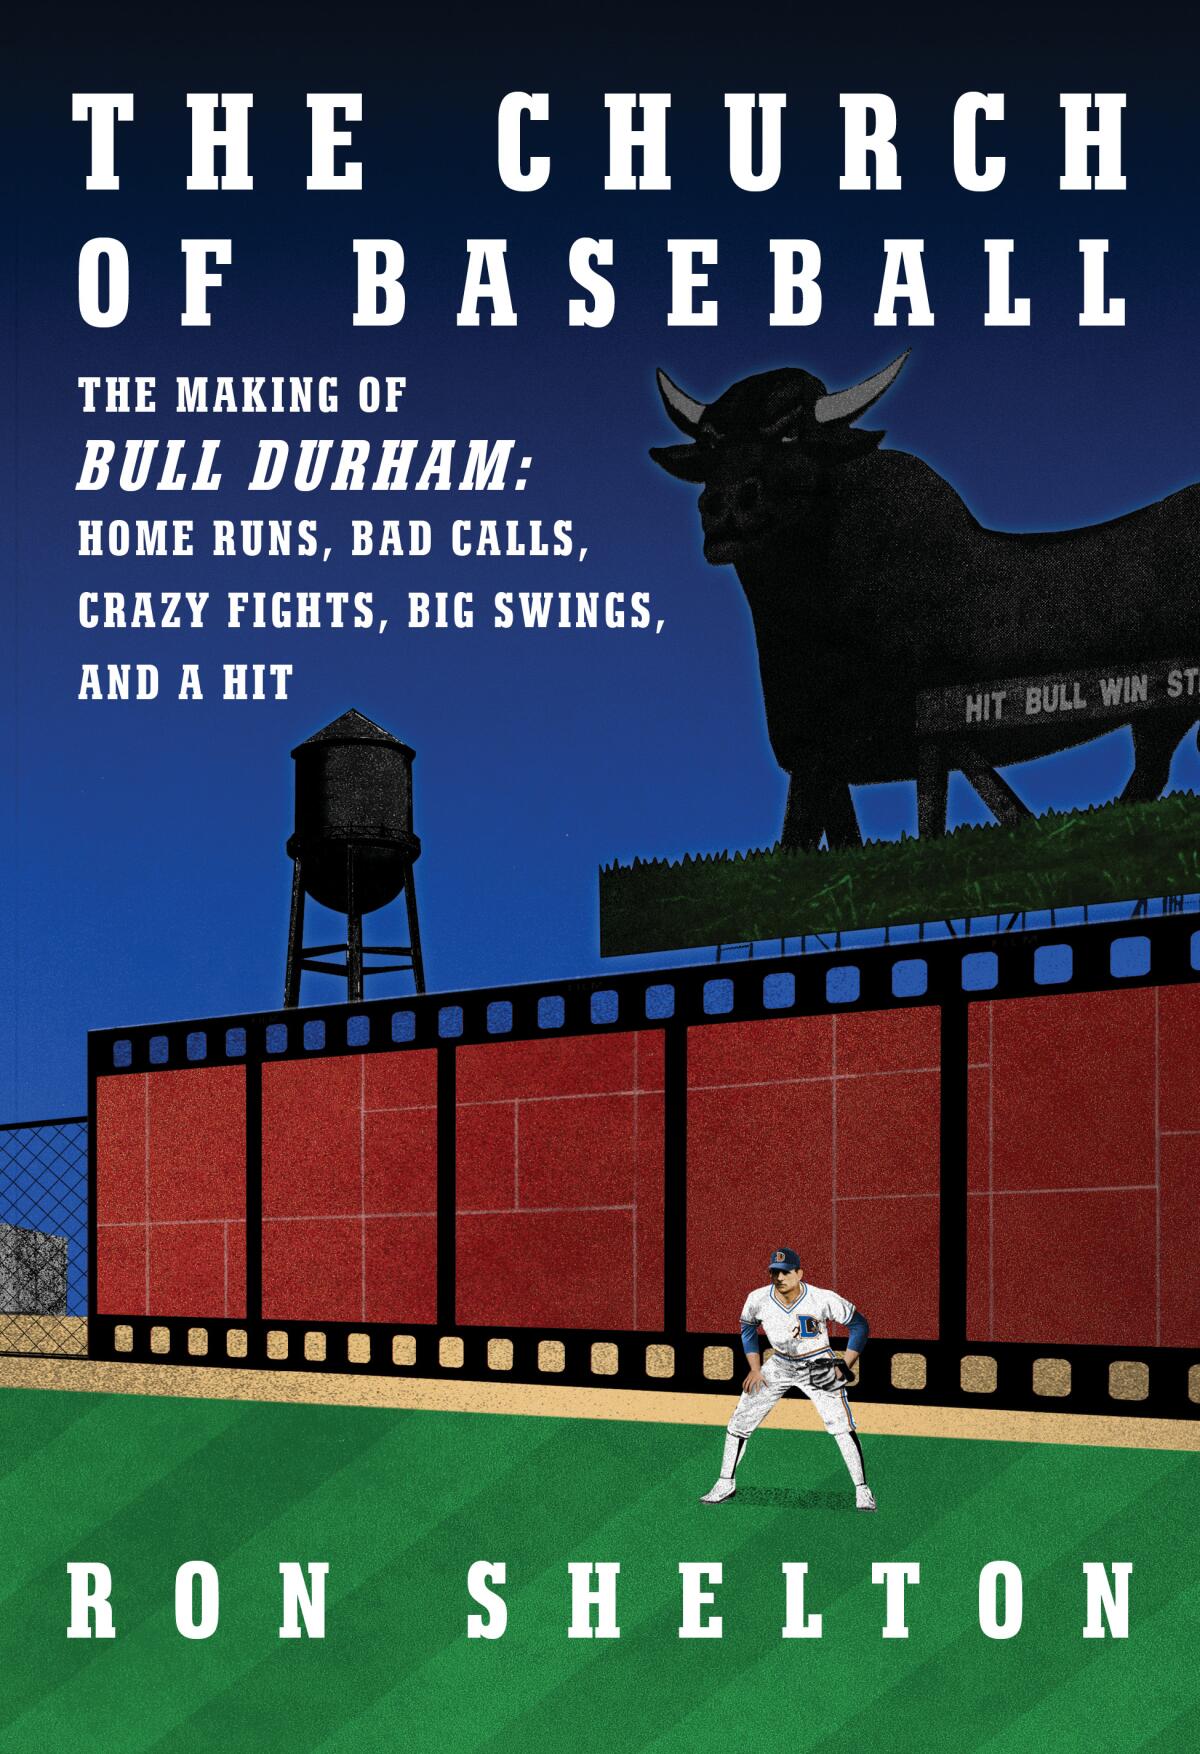 "The Church of Baseball" by writer and director Bill Shelton